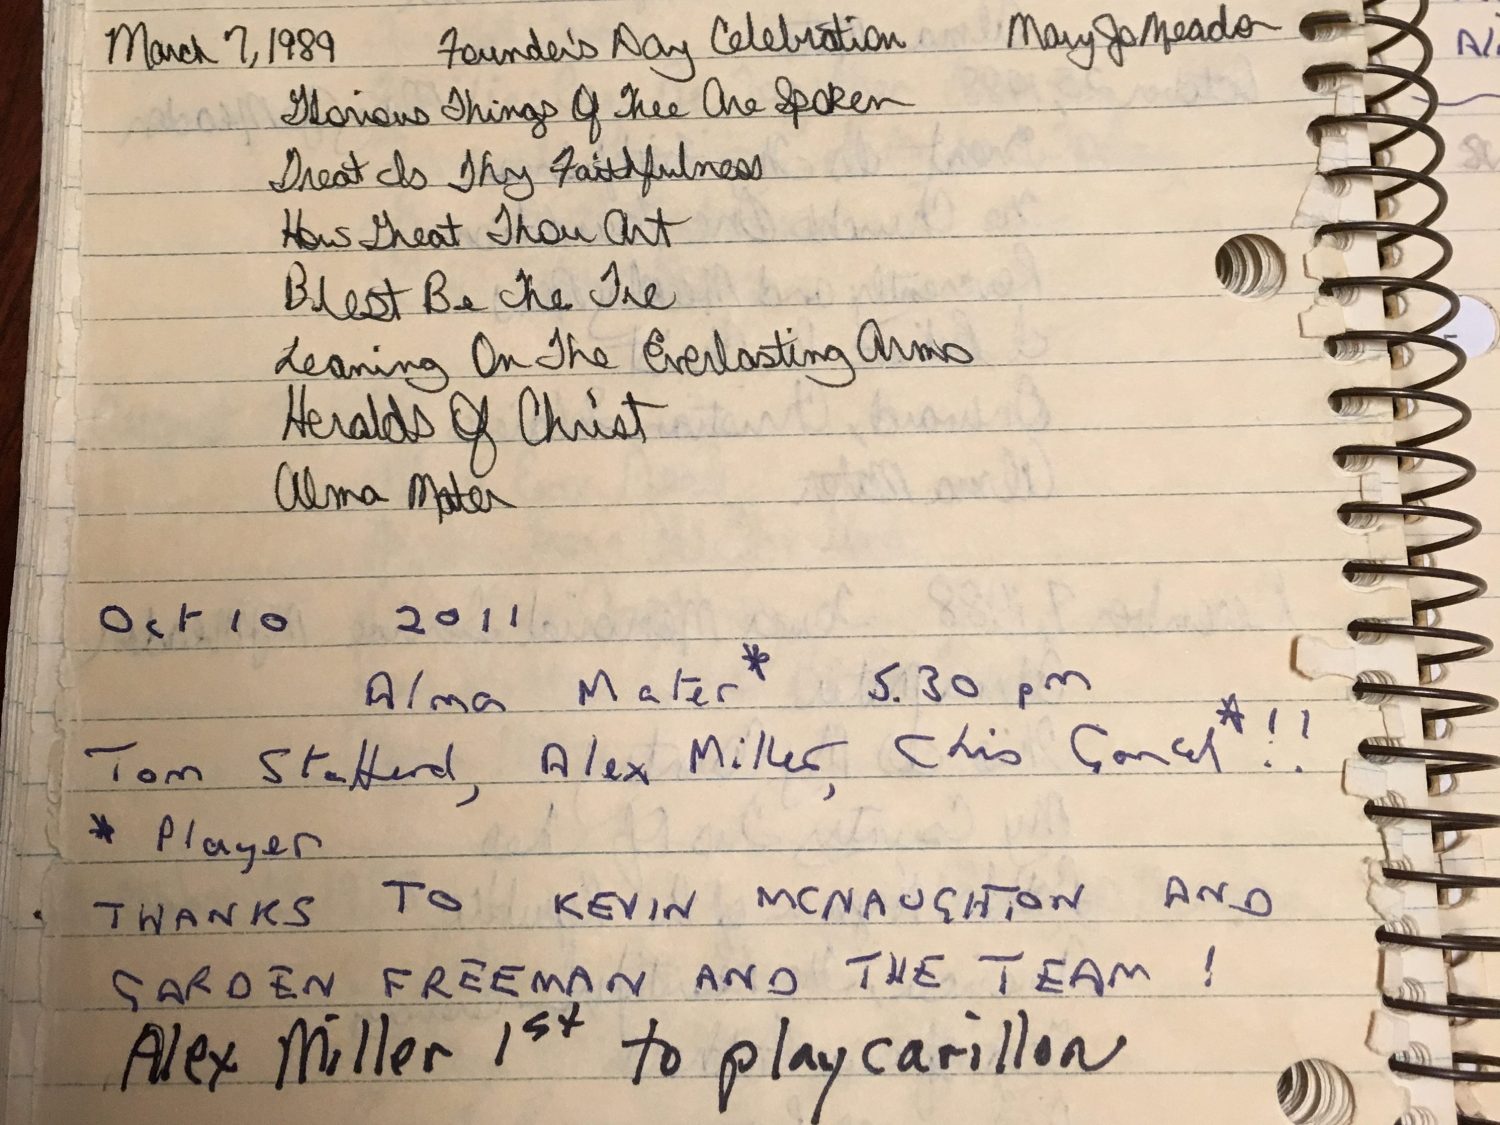 handwritten message in carillon notebook noting it was played in 2011, 22 years after last entry